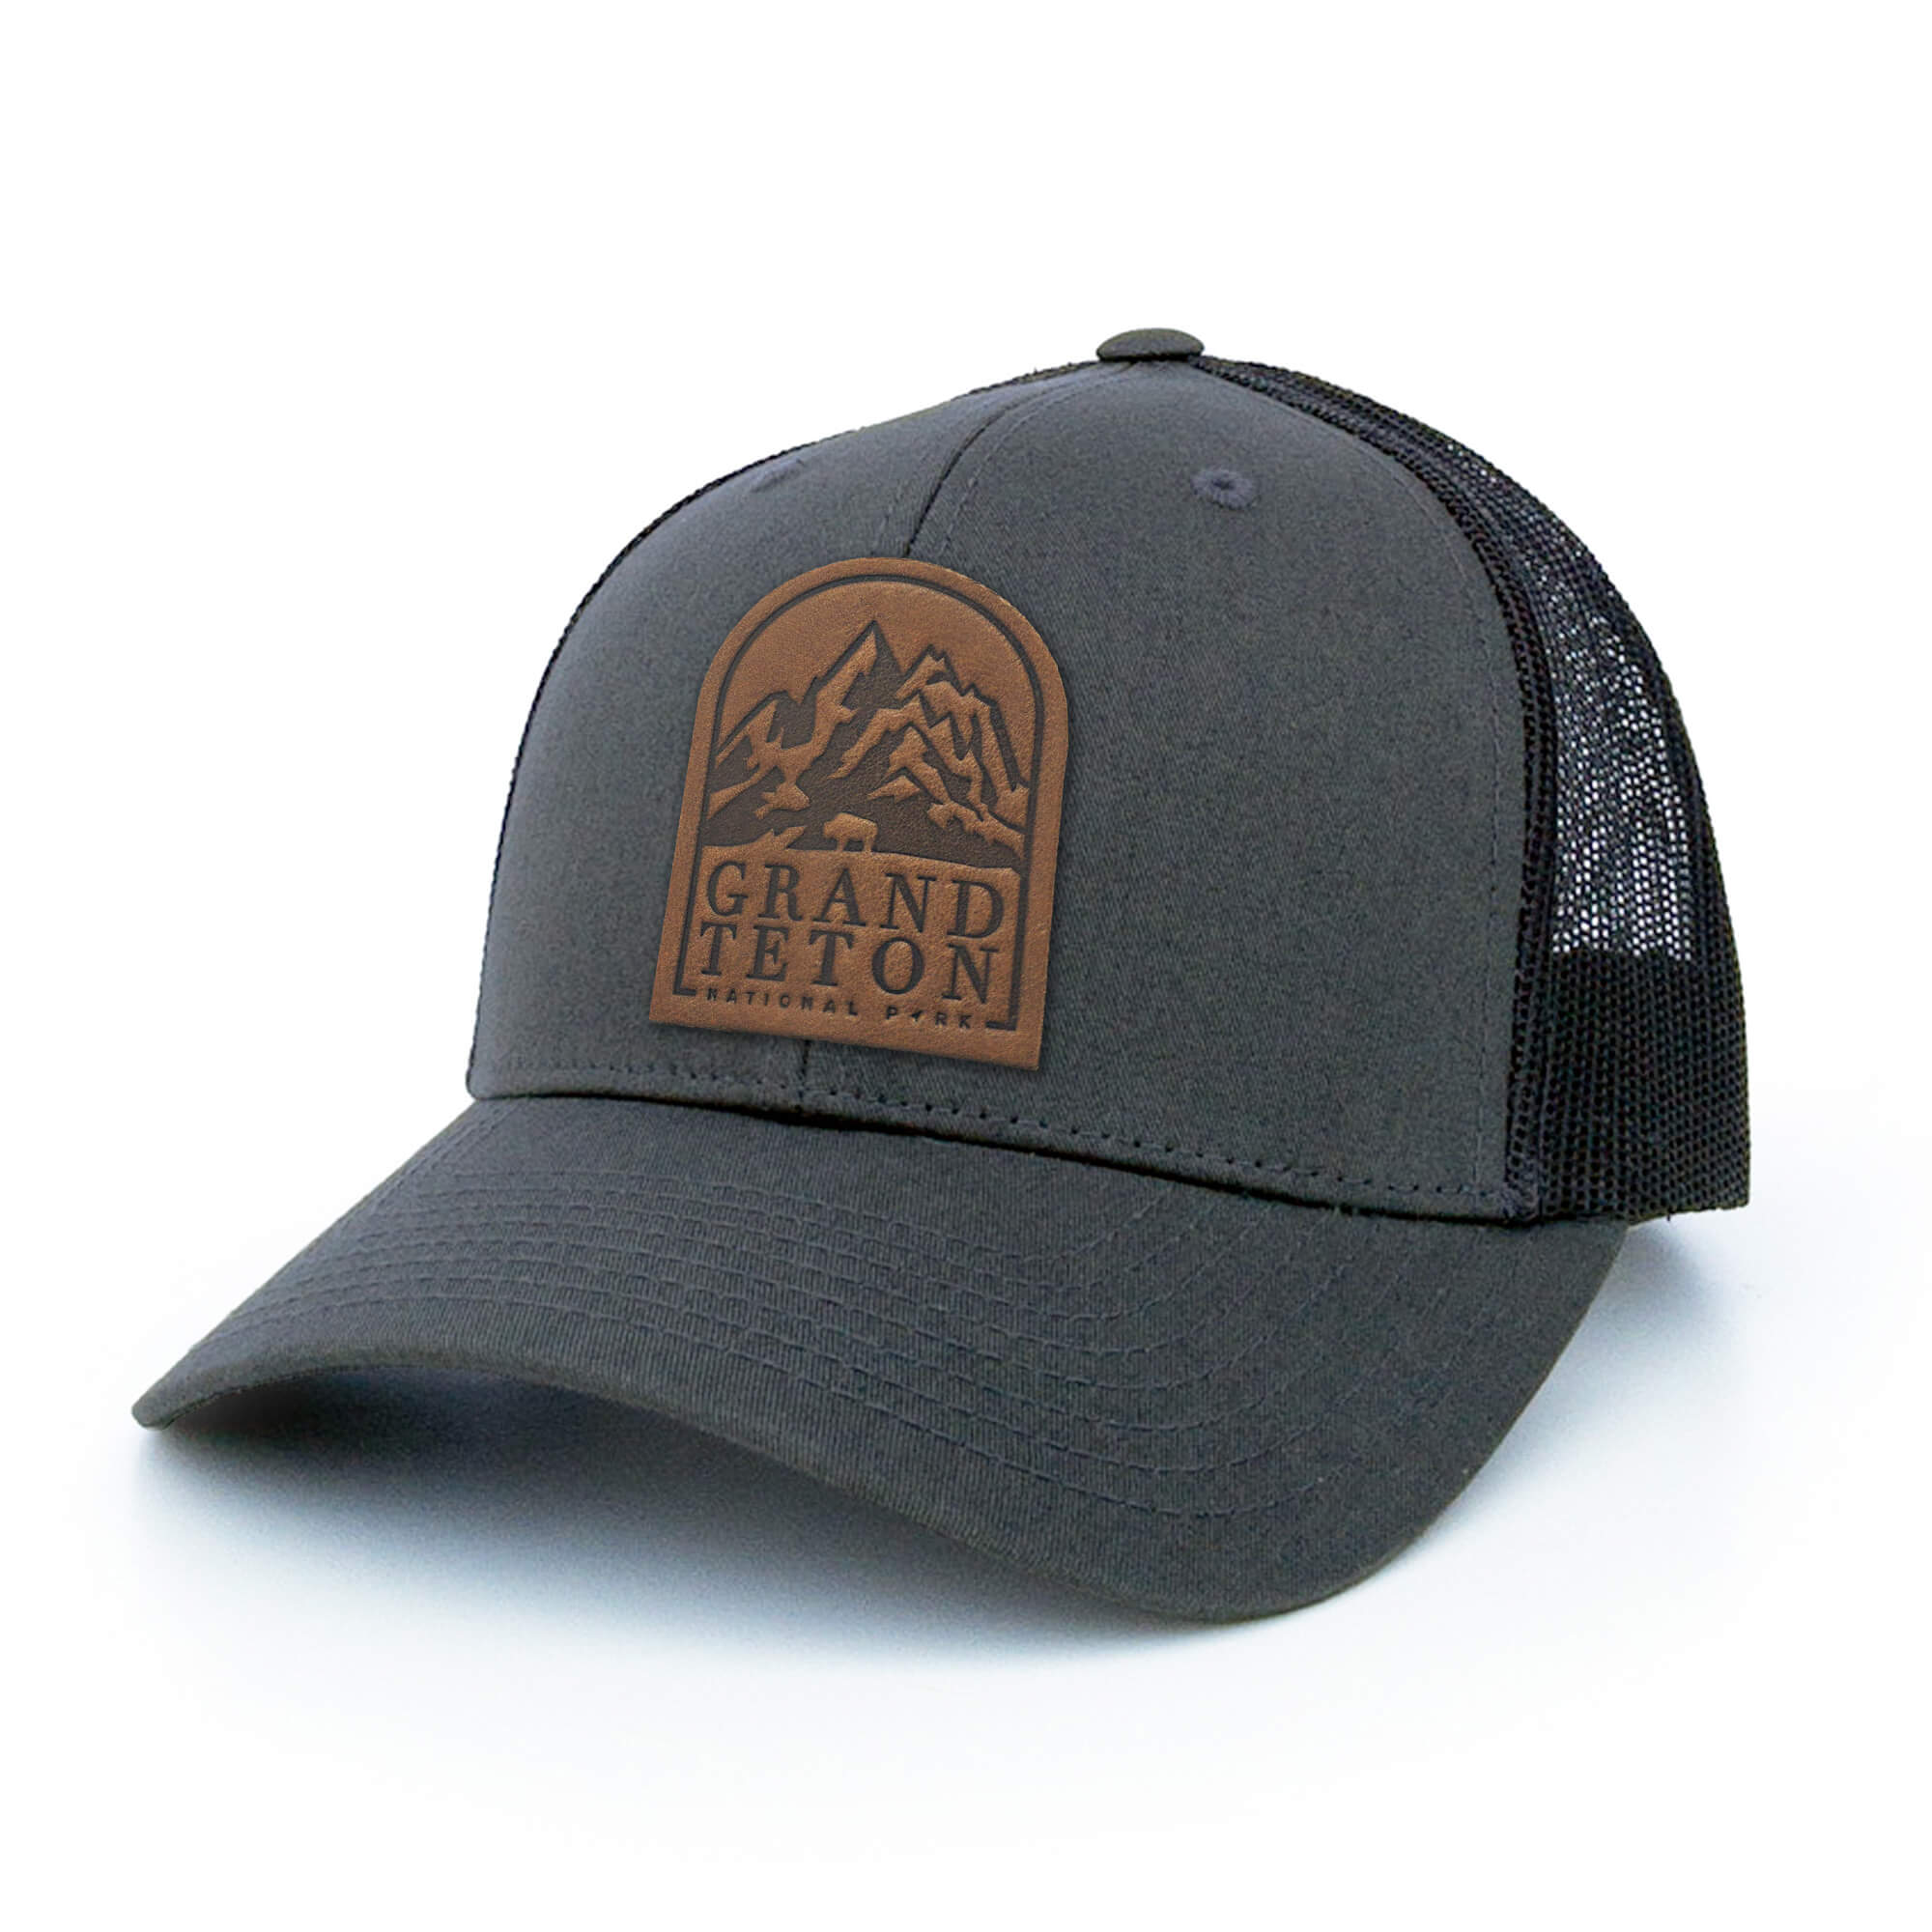 Charcoal trucker hat with full-grain leather patch of Grand Teton National Park | BLACK-007-003, CHARC-007-003, NAVY-007-003, HGREY-007-003, MOSS-007-003, BROWN-007-003